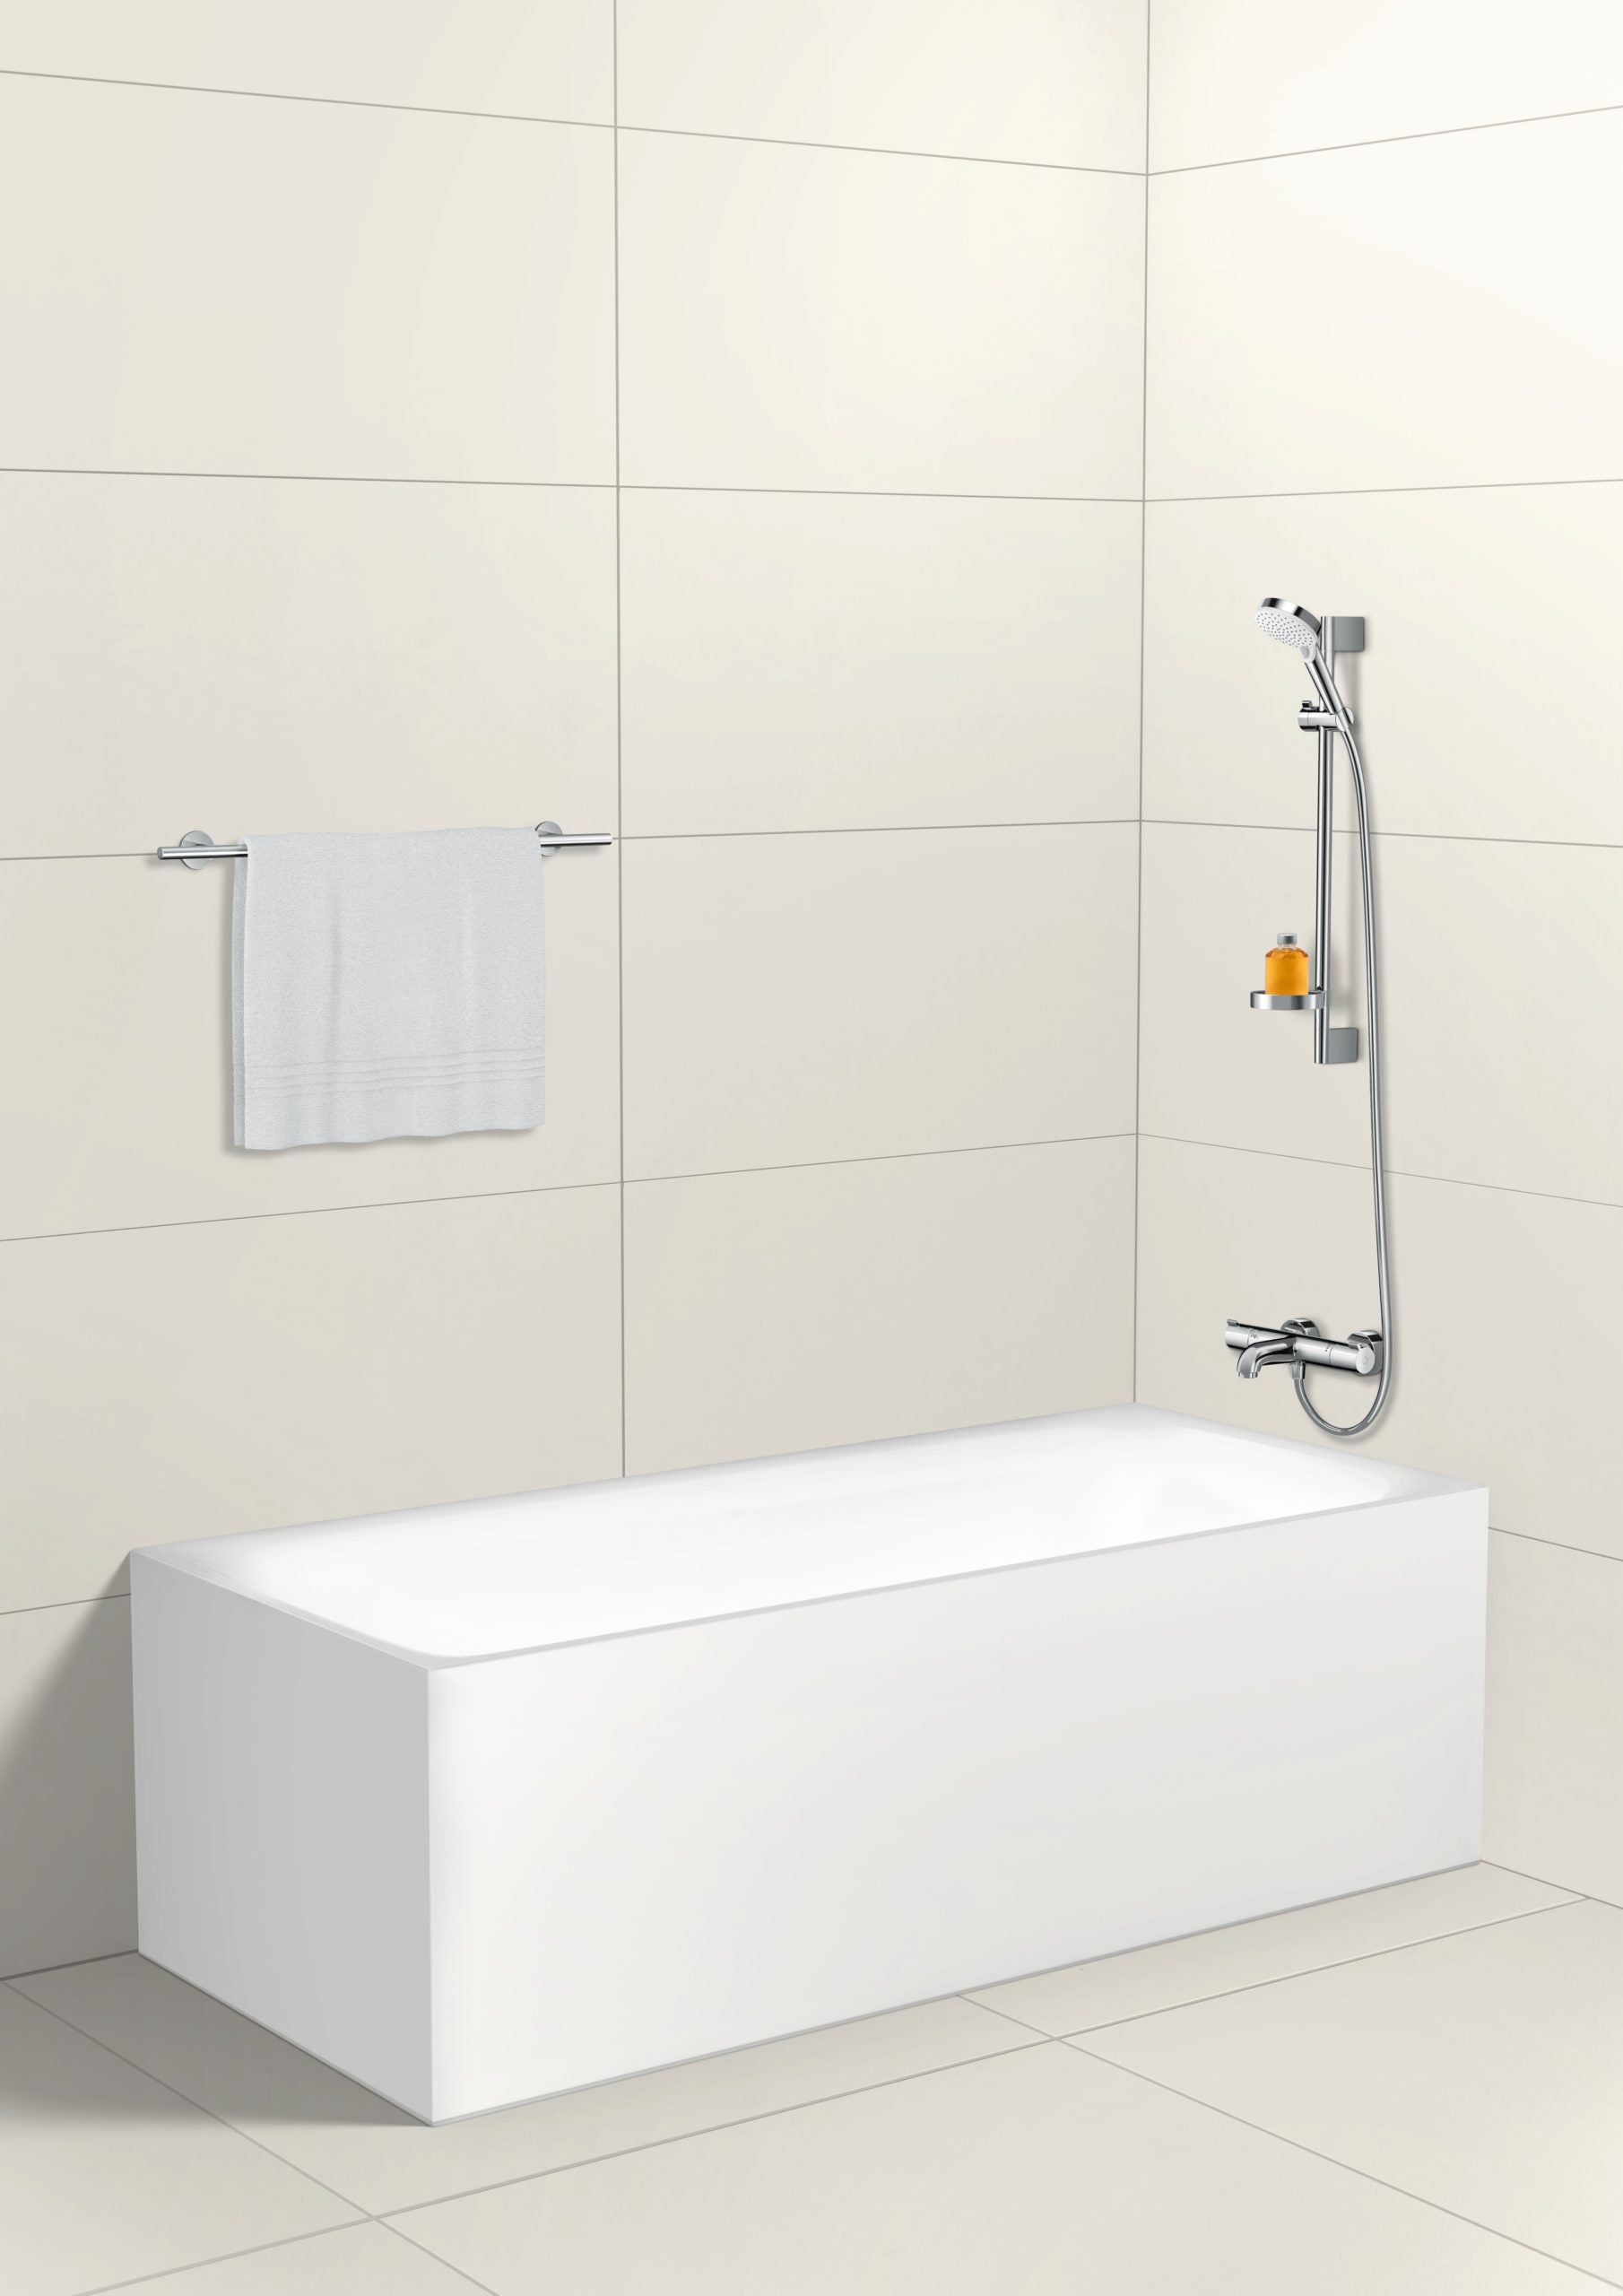 Crometta Vario Shower Set - Premium Showers from Hansgrohe - Just GHS325! Shop now at Kimo in Ghana